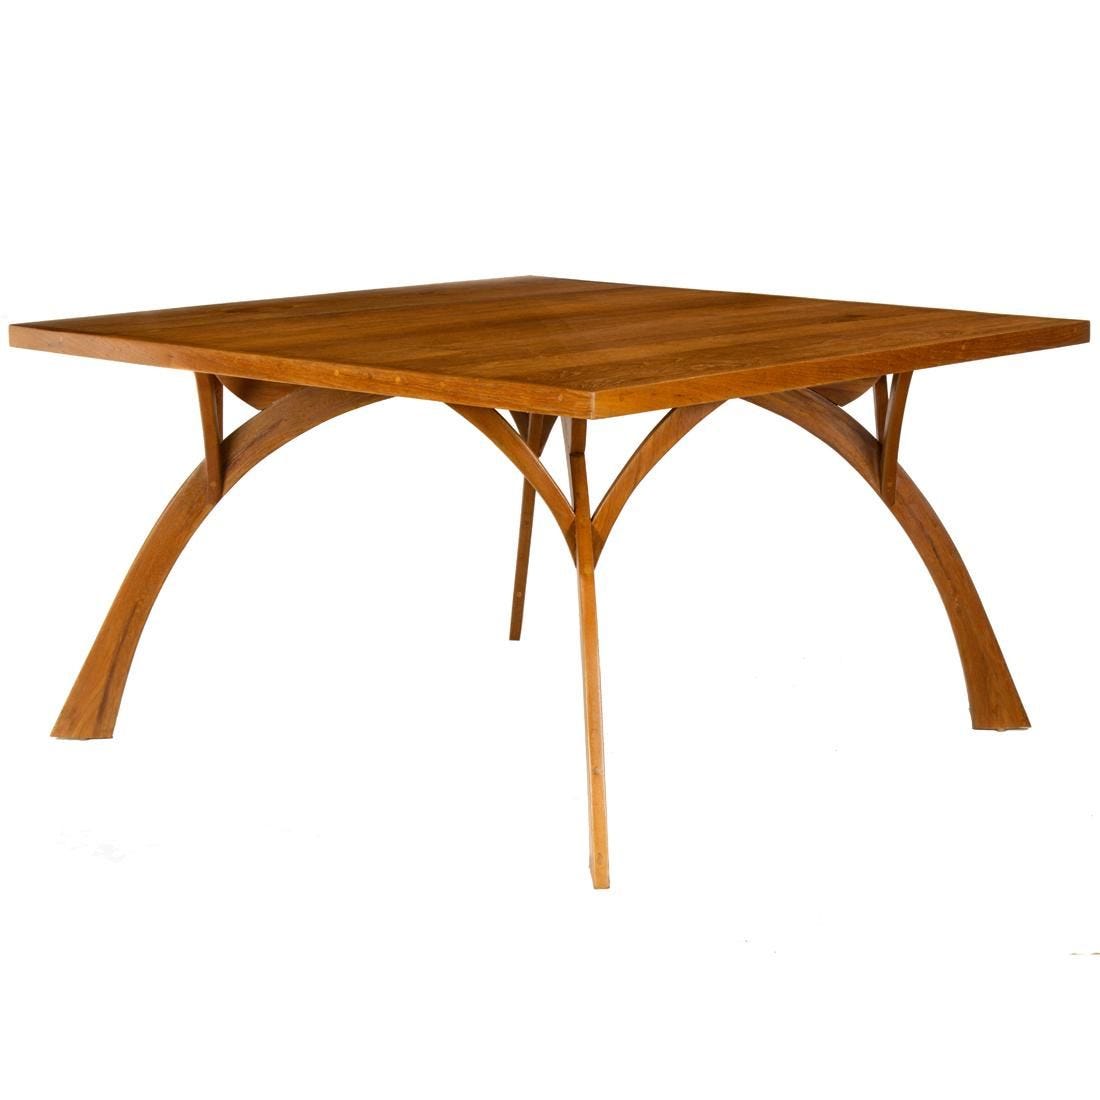 Studio, Dining Table, early 1970s, in the manner of Wharton Esherick